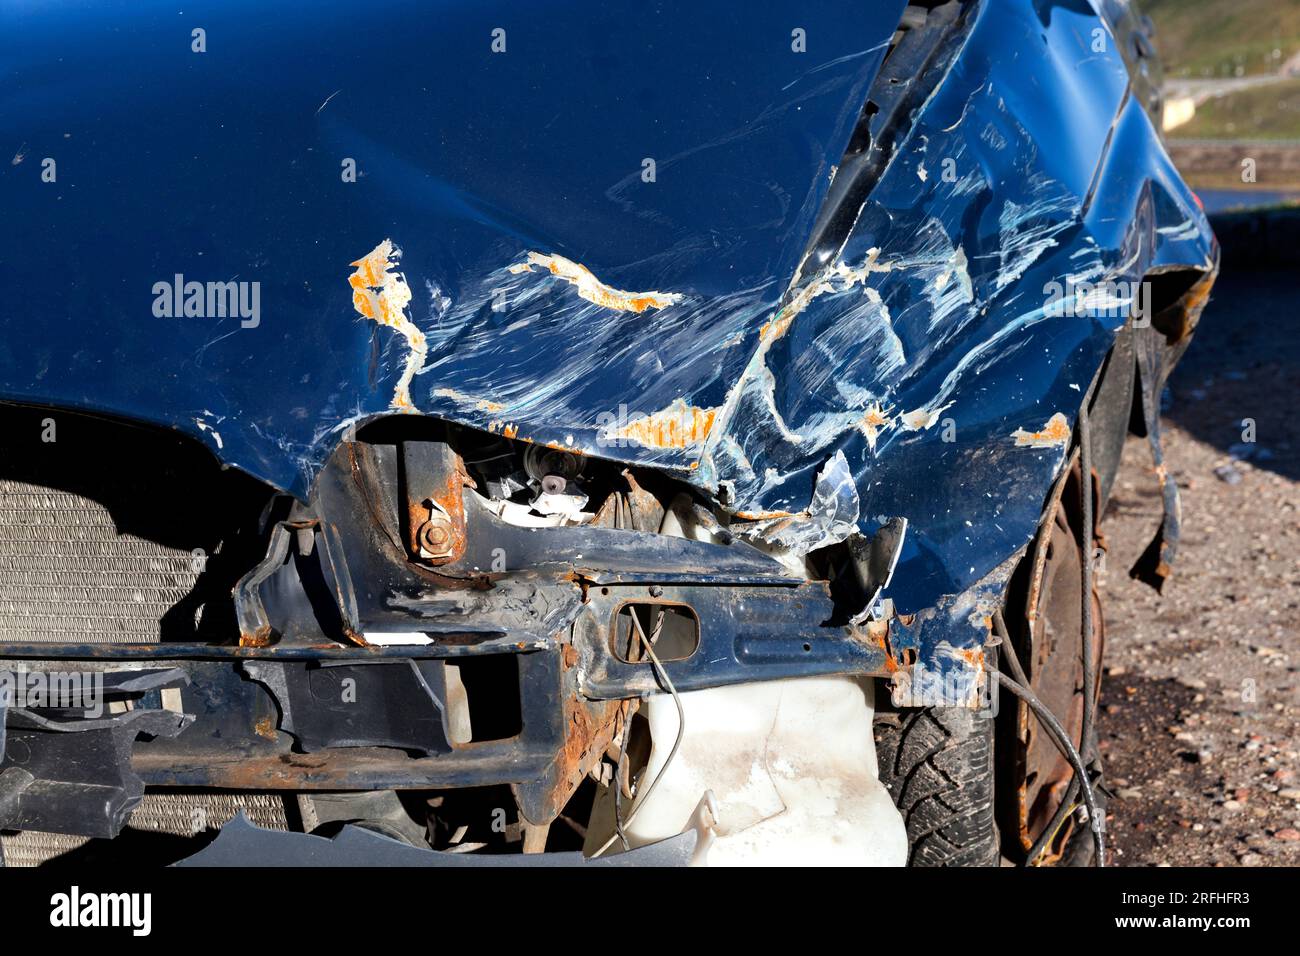 part of the blue car after the accident on the road, the destruction of the car after the accident Stock Photo